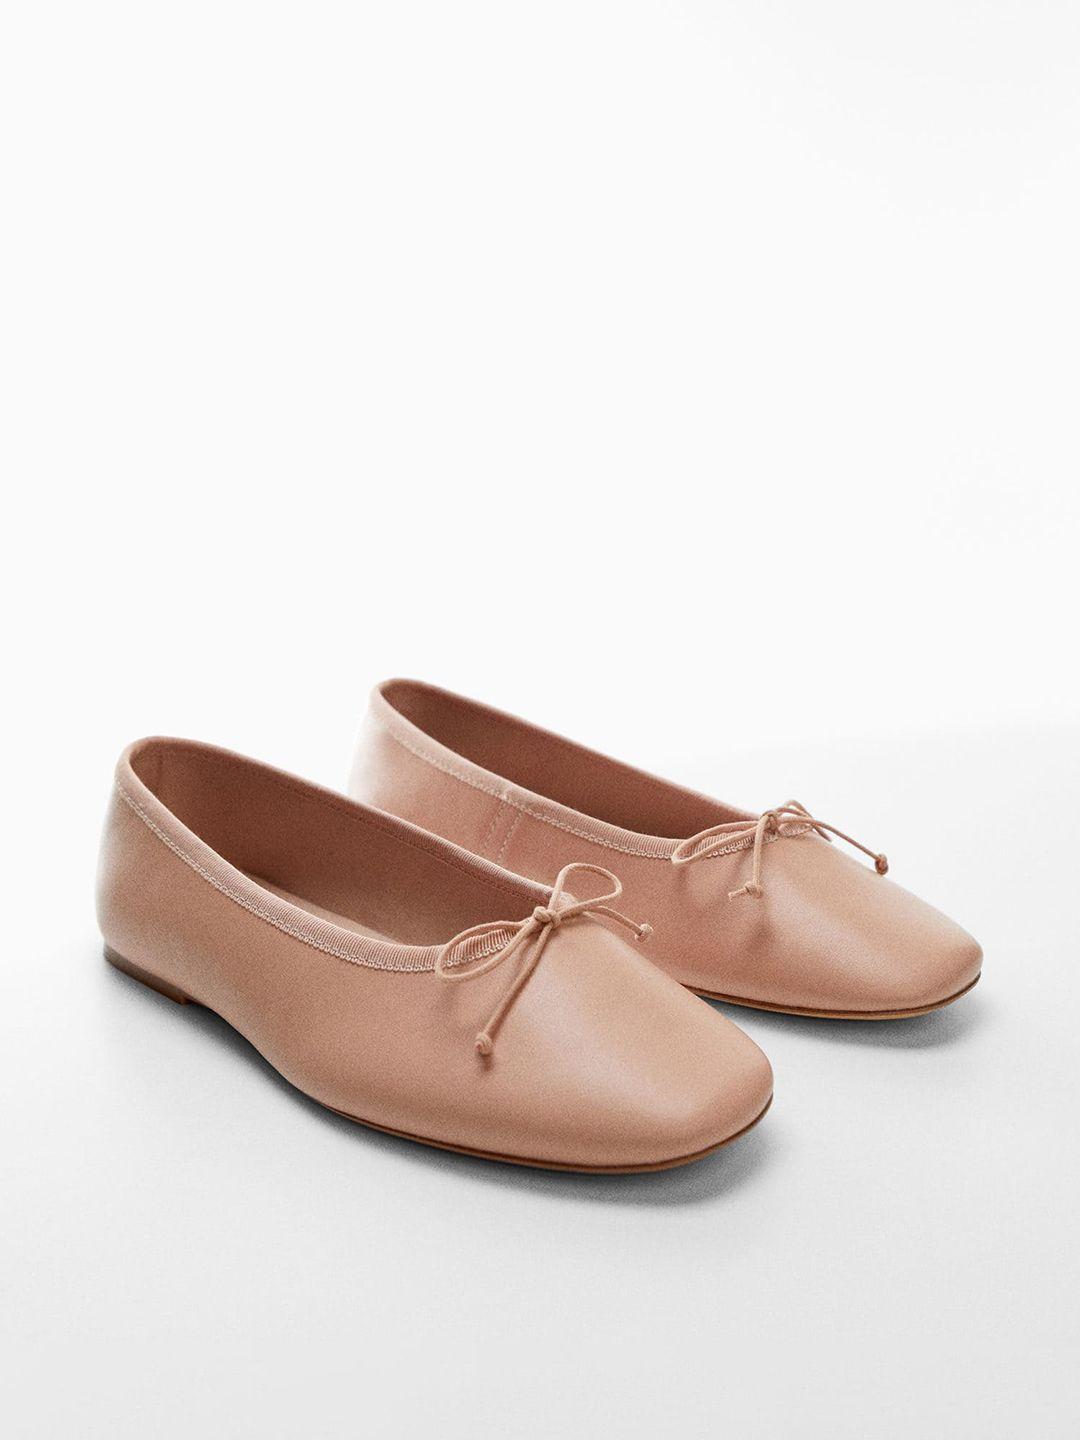 mango-women-leather-sustainable-ballerinas-with-bows-detail